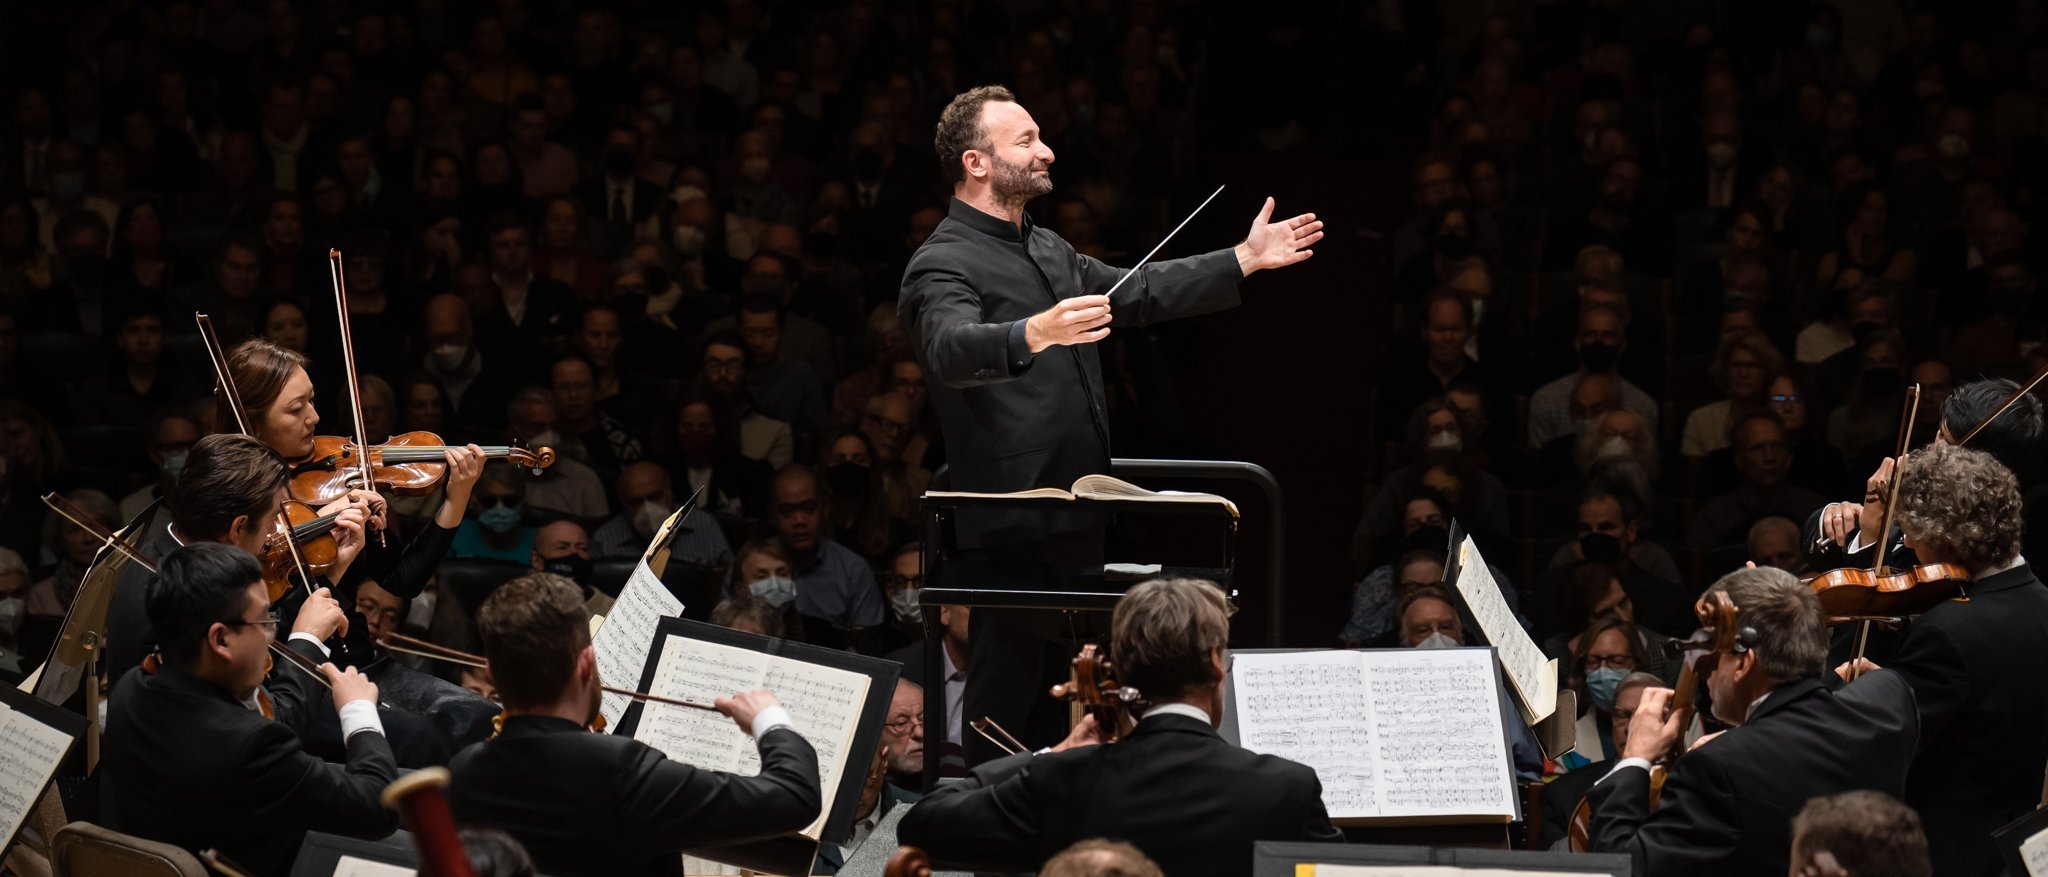 Kirill Petrenko stands at the conductor’s desk and conducts the Berliner Philharmoniker